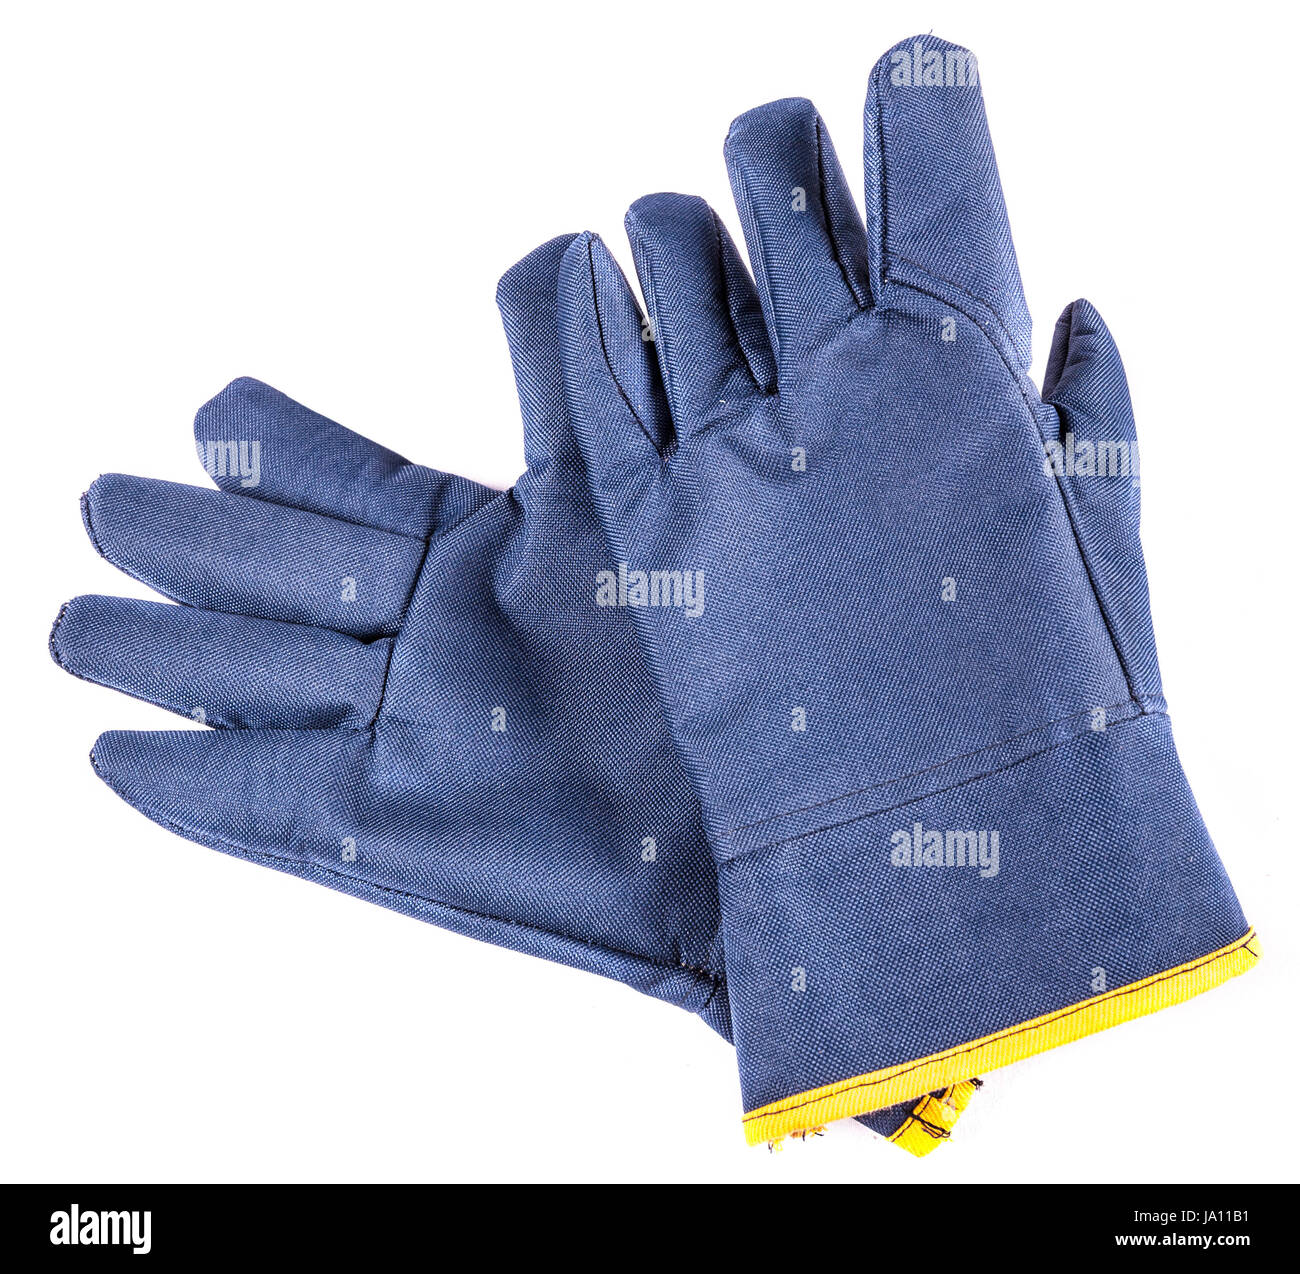 Wool gloves isolated Cut Out Stock Images & Pictures - Page 3 - Alamy